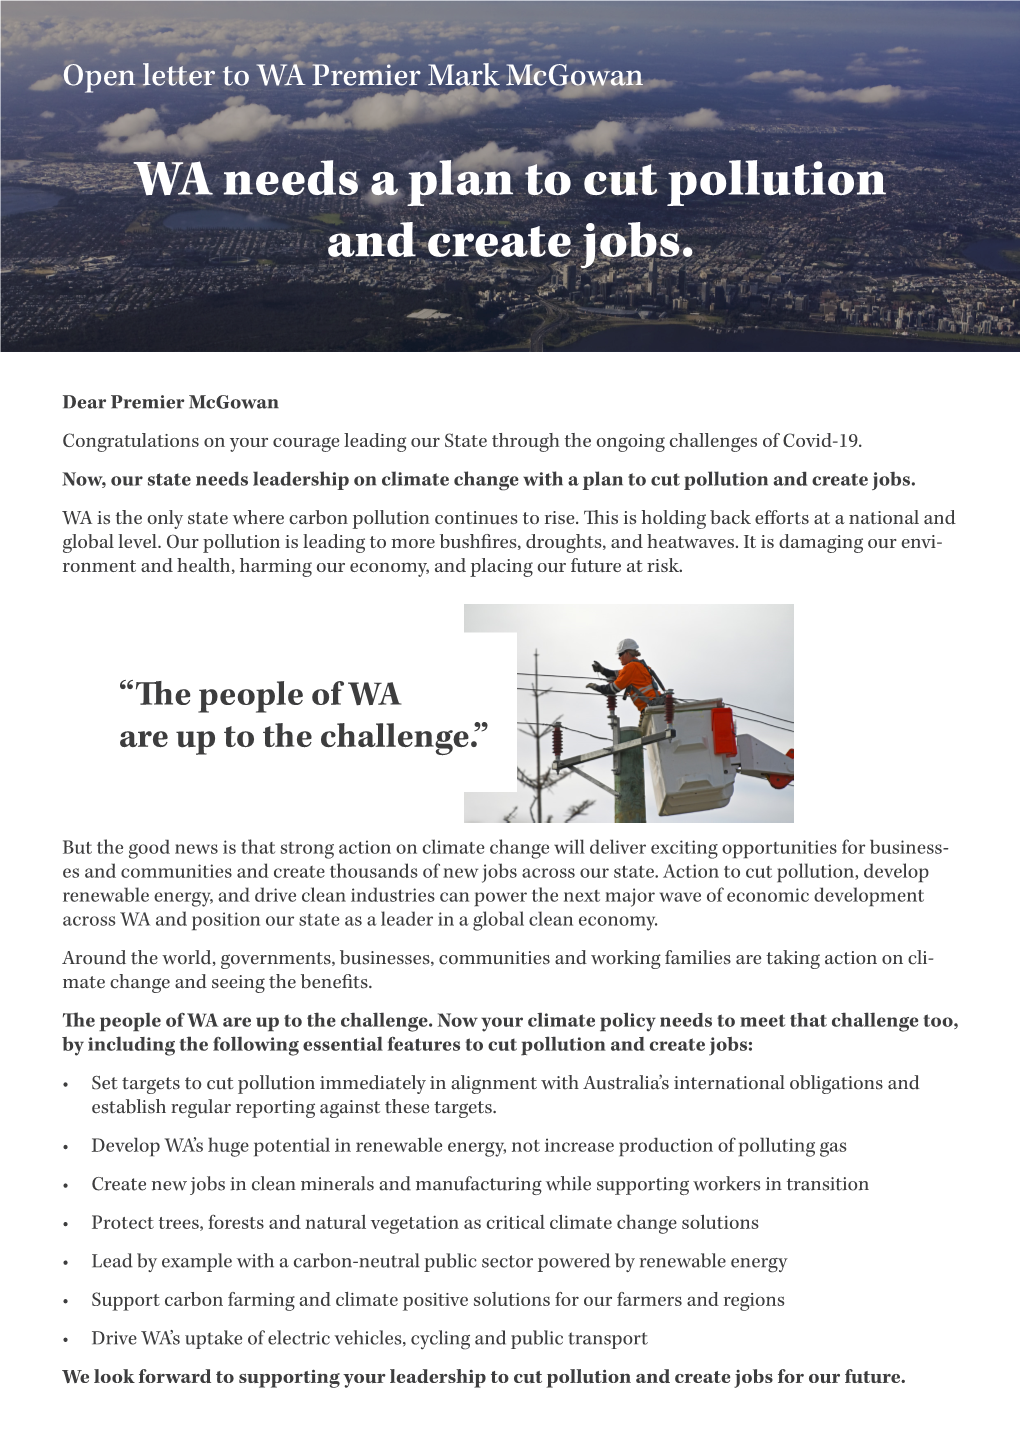 Open Letter to WA Premier Re Climate Change, Pollution and Jobs